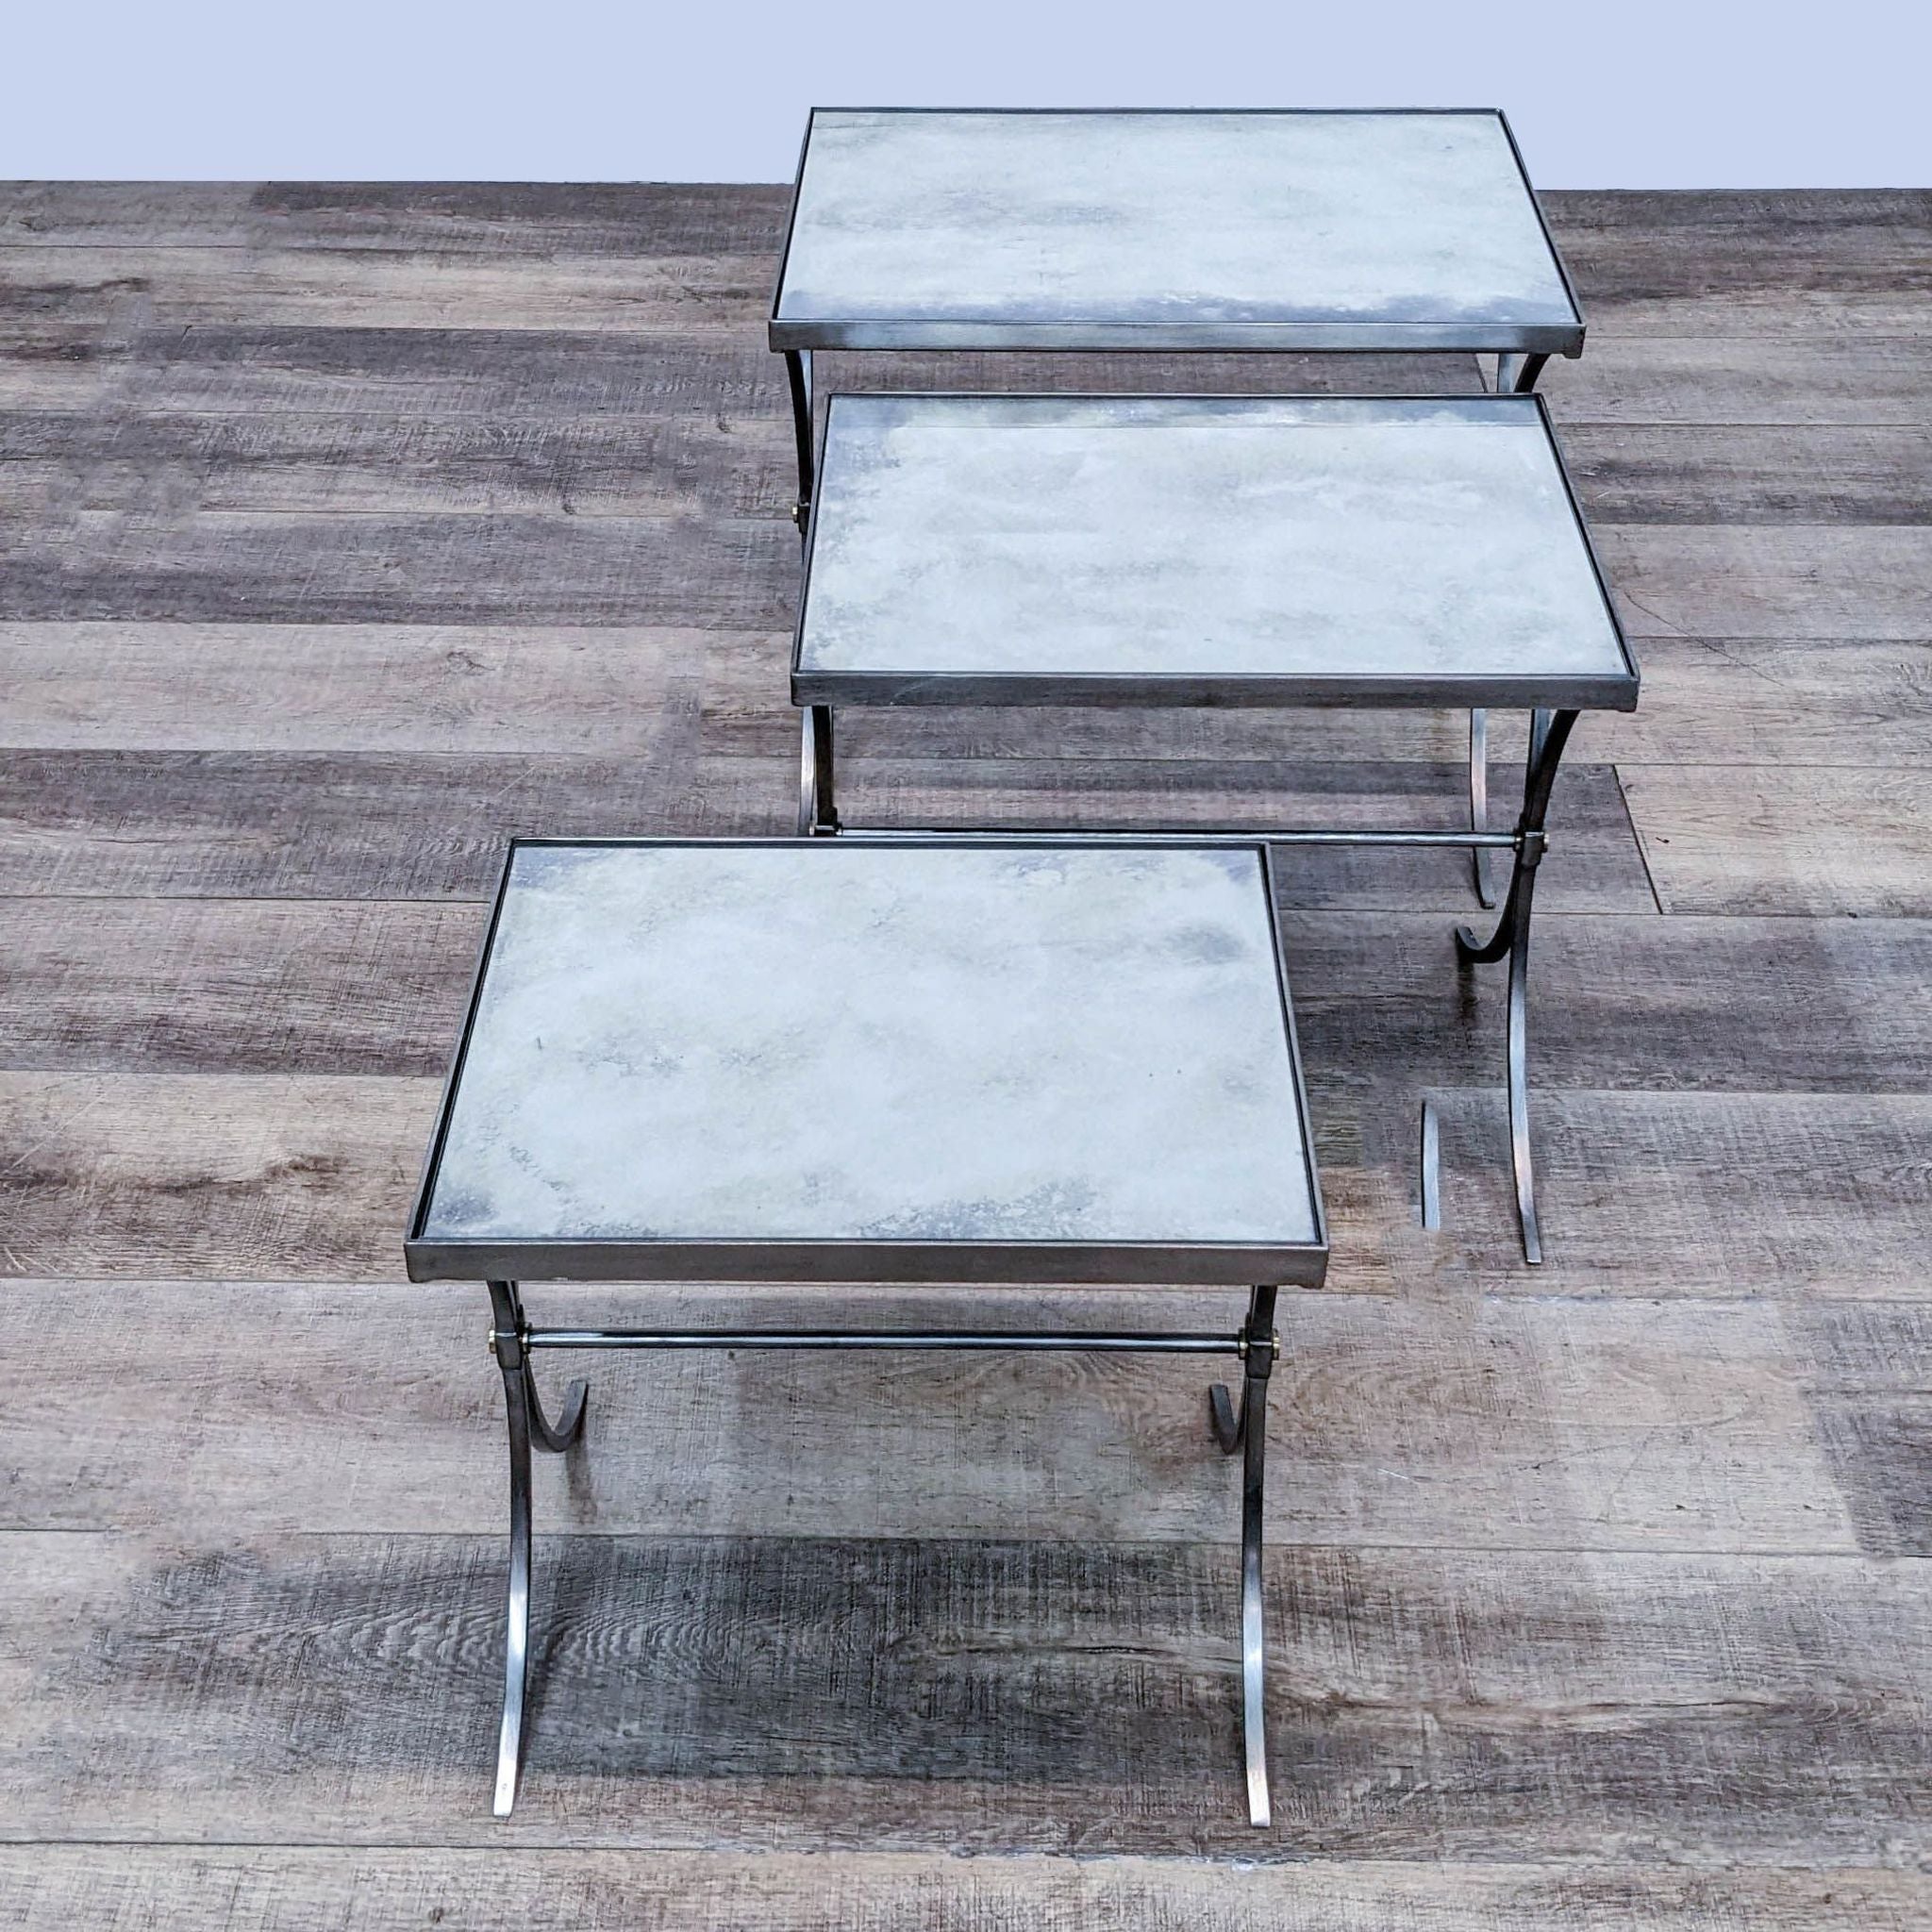 Three Bernhardt Furniture metal end tables with mirrored tops on a wooden floor.